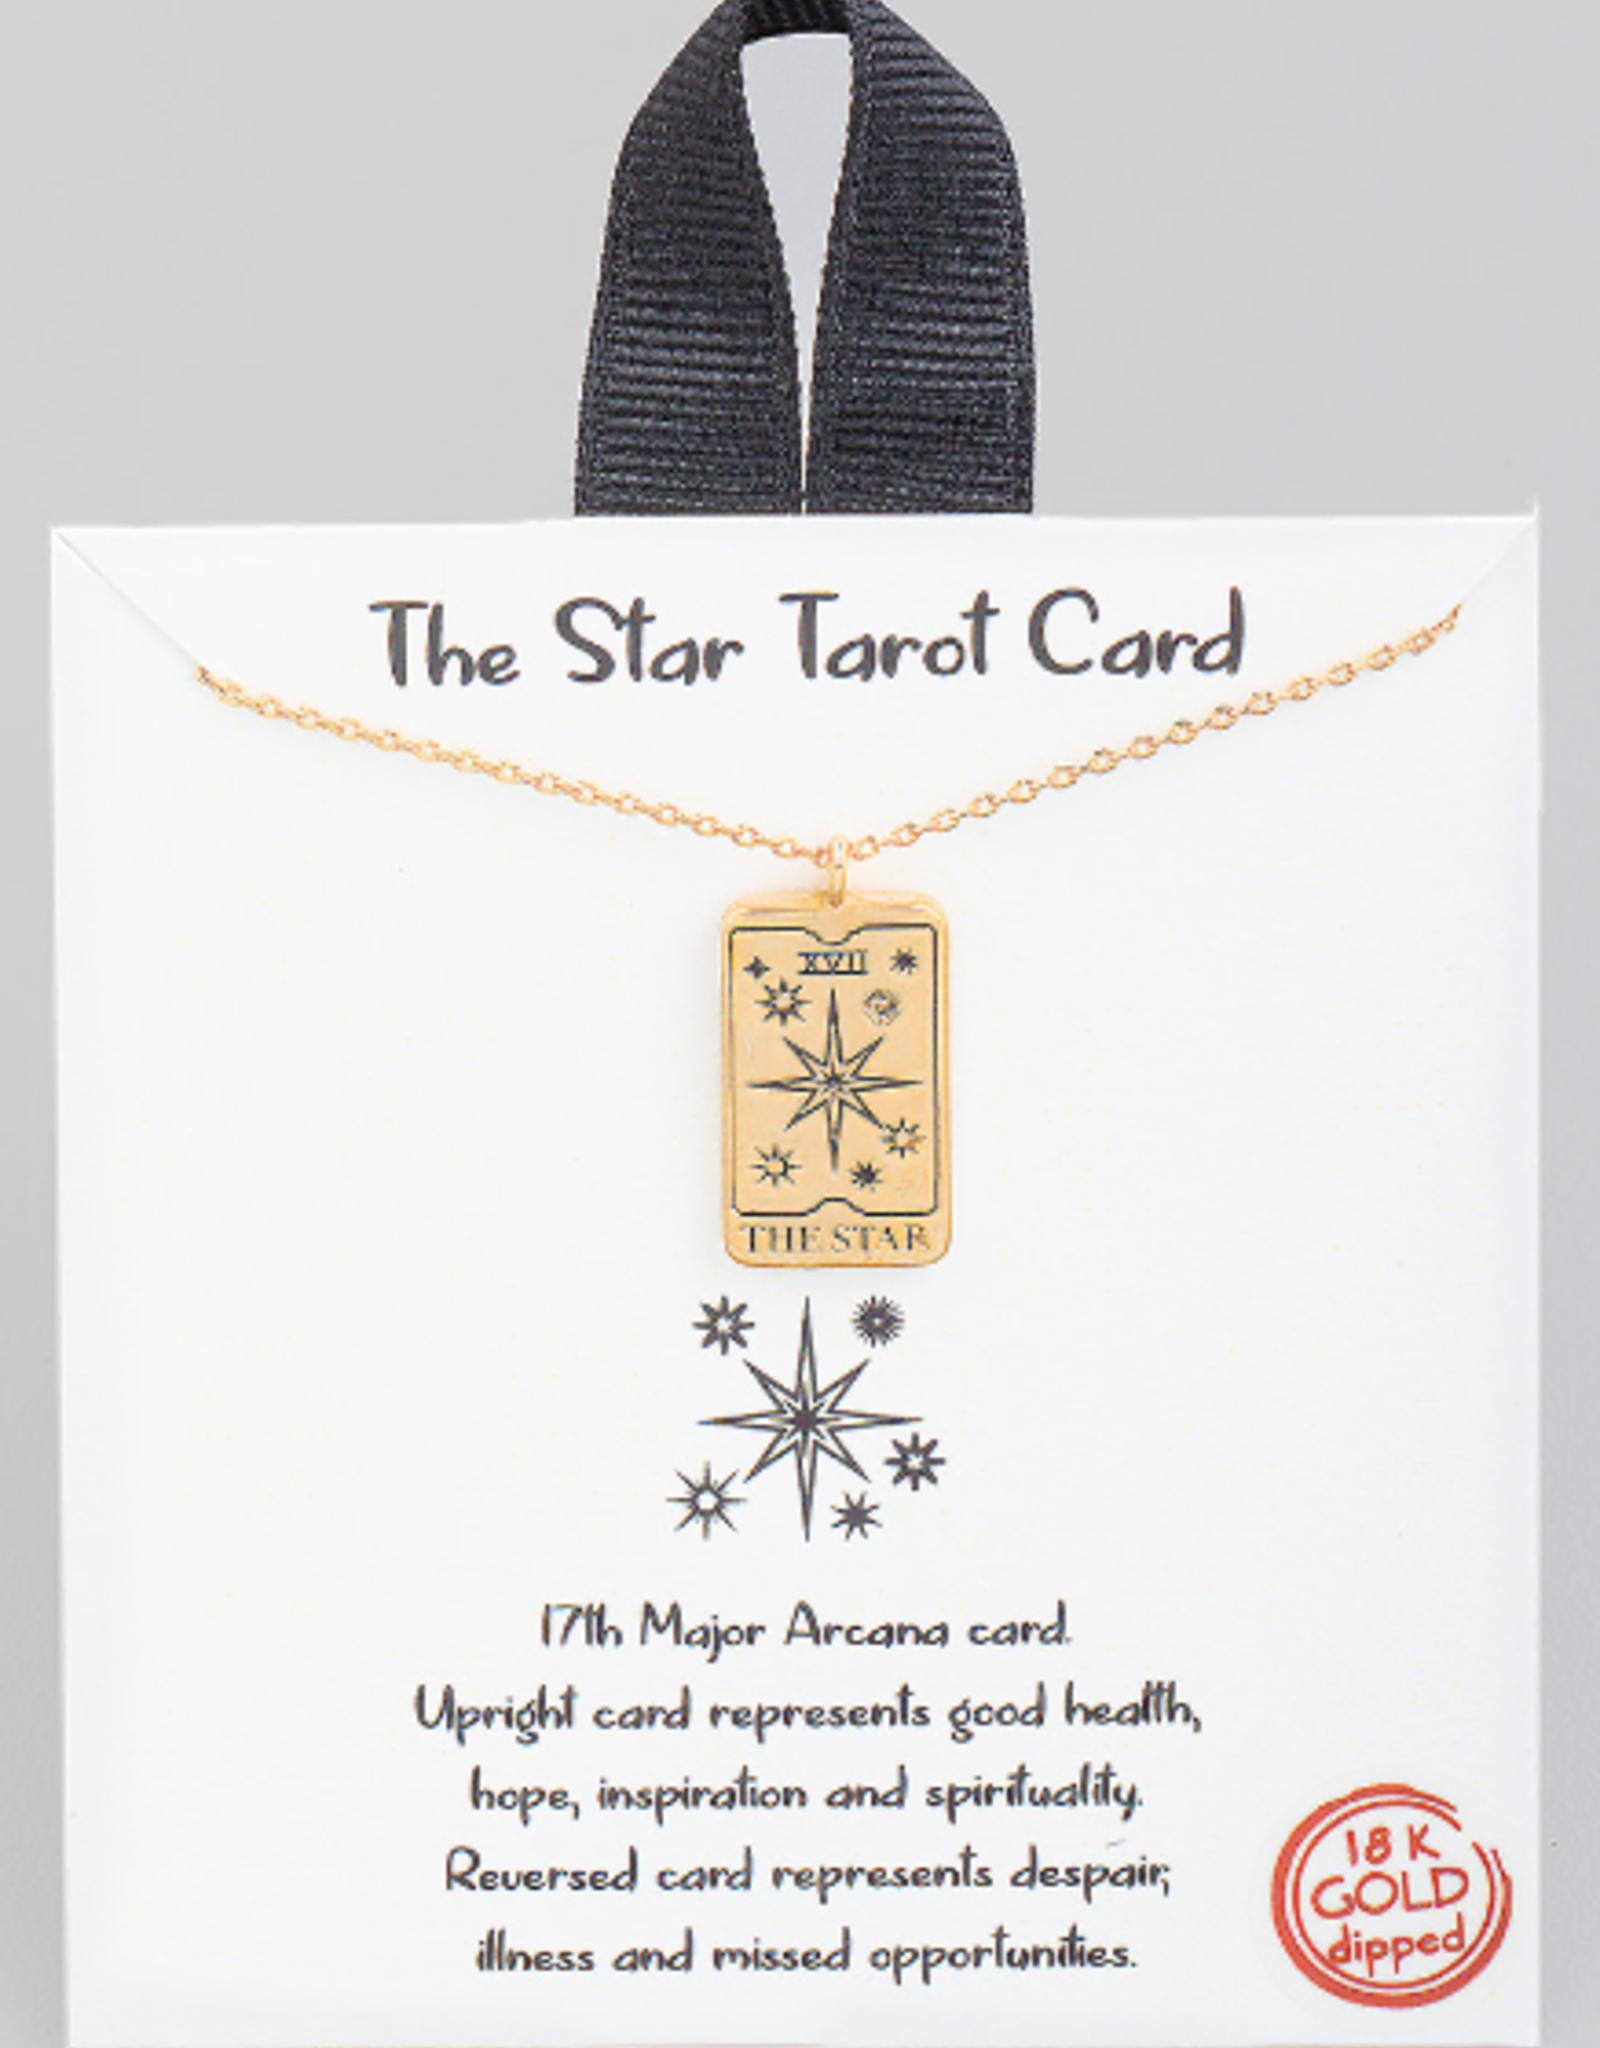 Fame Accessories The Star Tarot Card Pendant Necklace